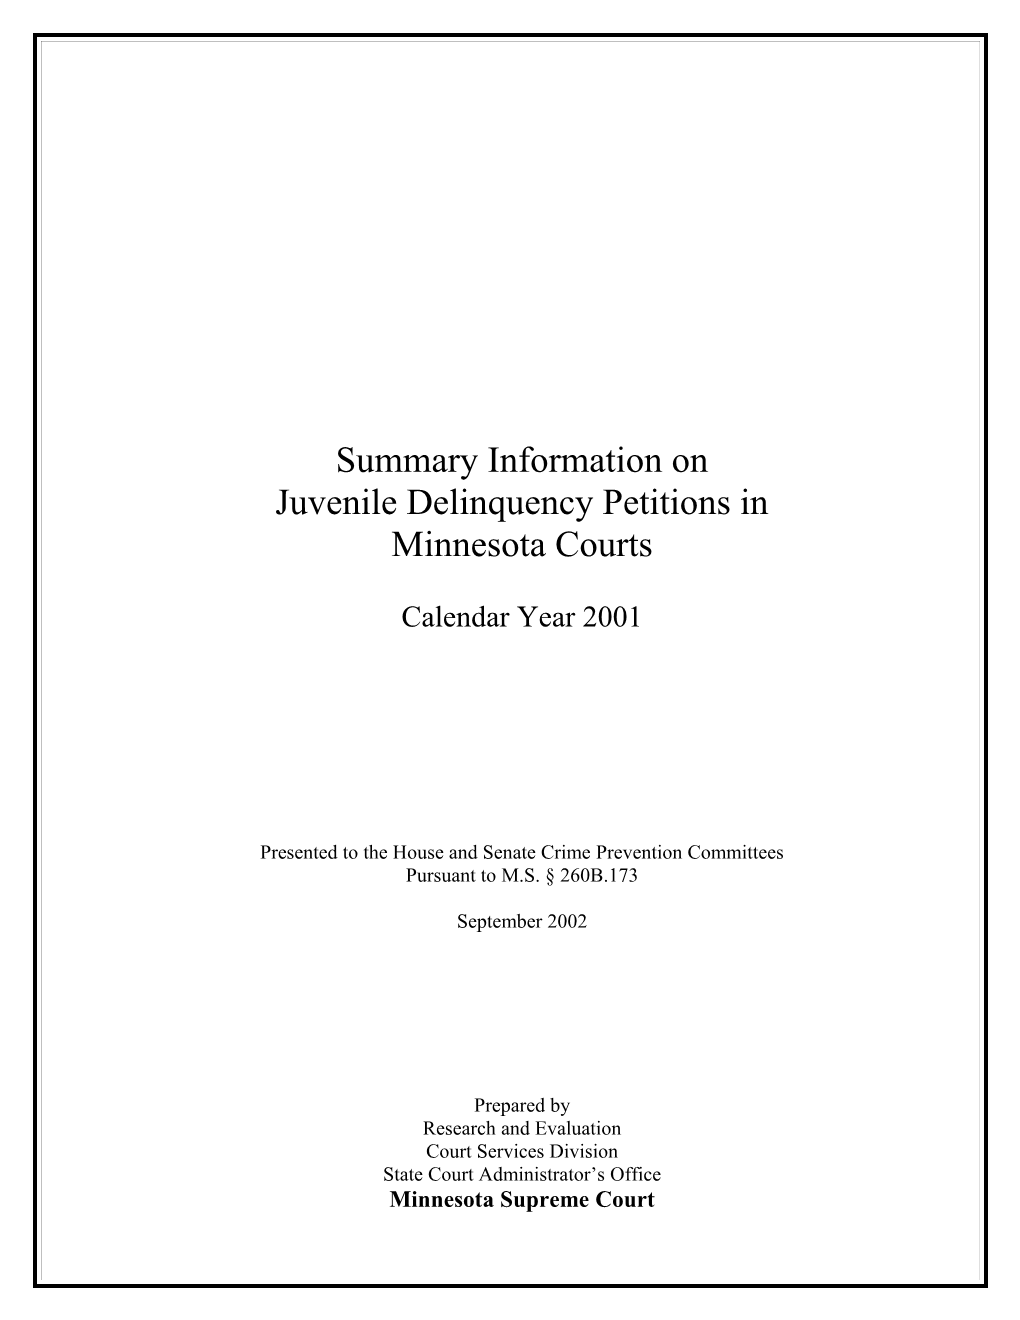 Juvenile Delinquency Petitions Filed in Minnesota in 2000